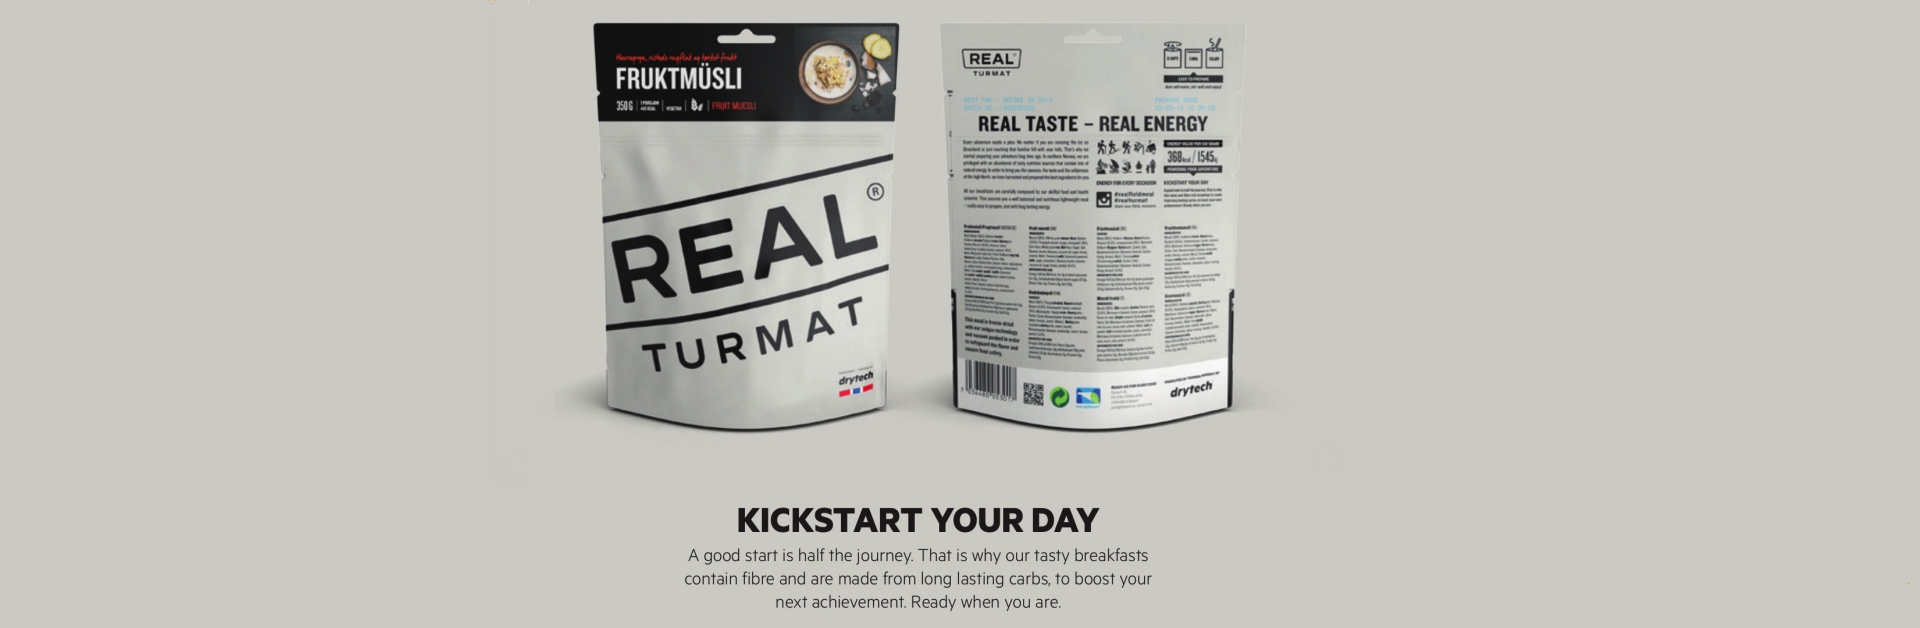 Kickstart your day with Turmat